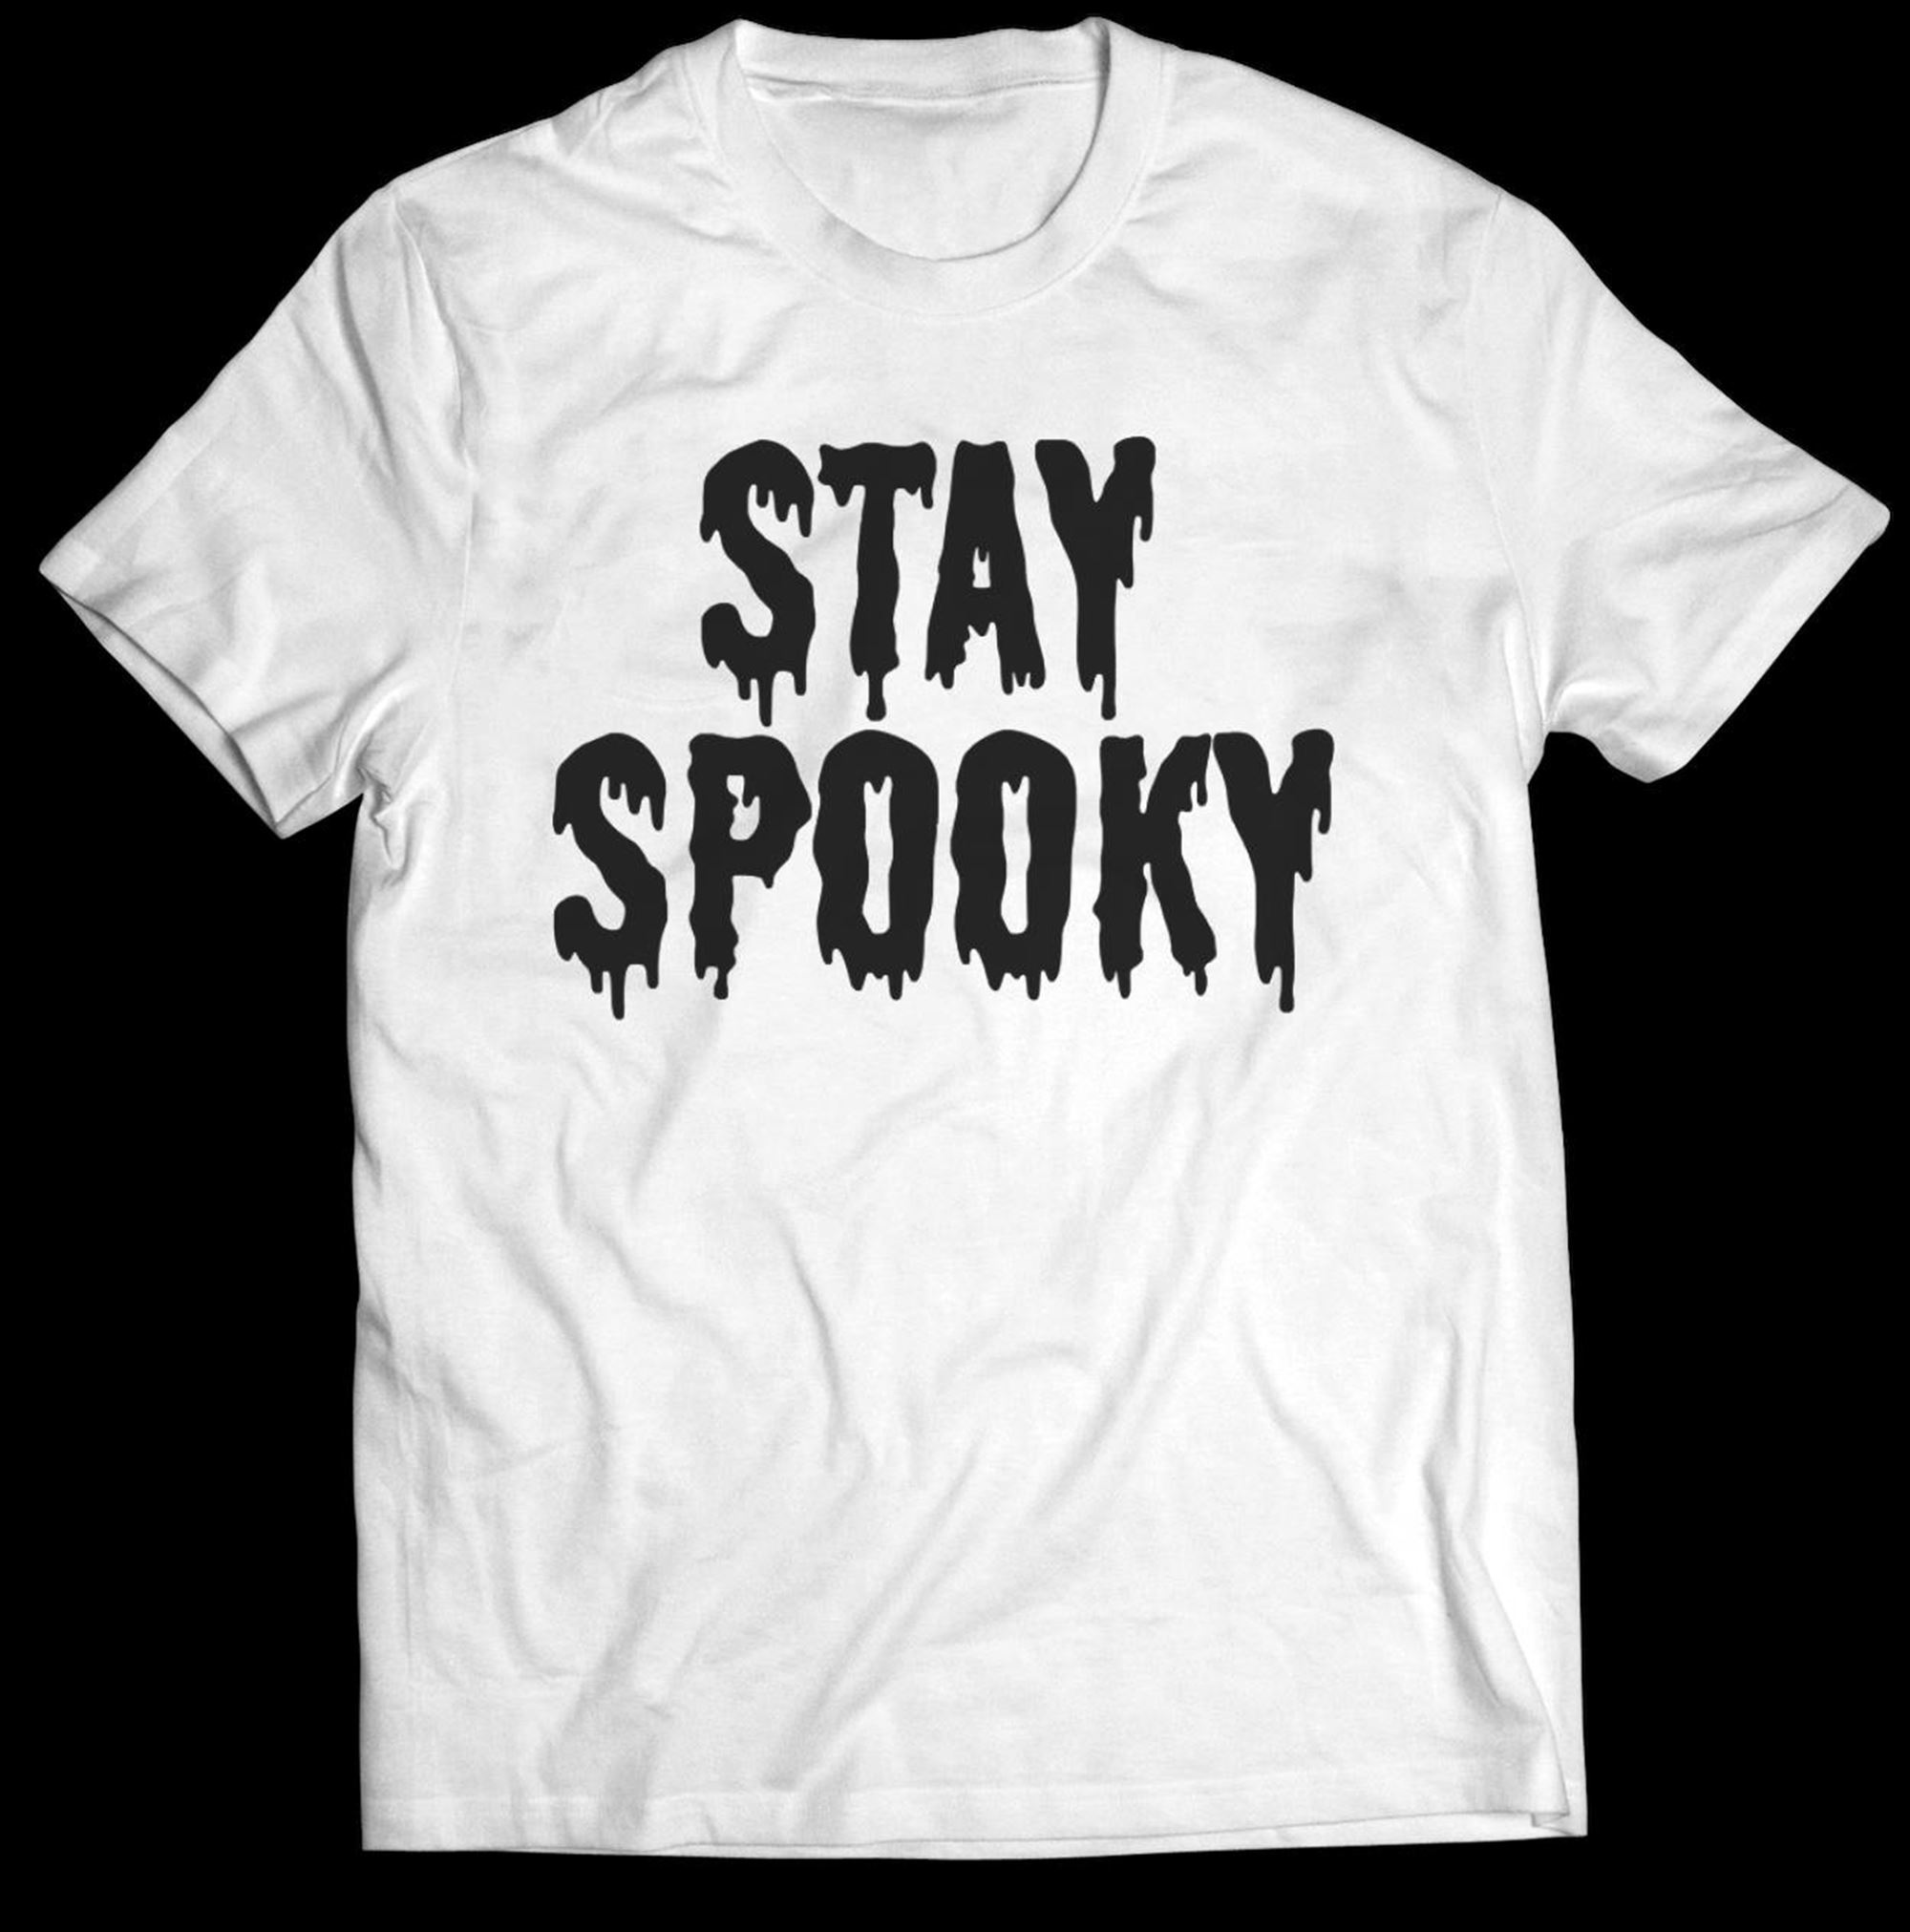 Stay Spooky Halloween Black Color T-shirt Full Size Up To 5xl